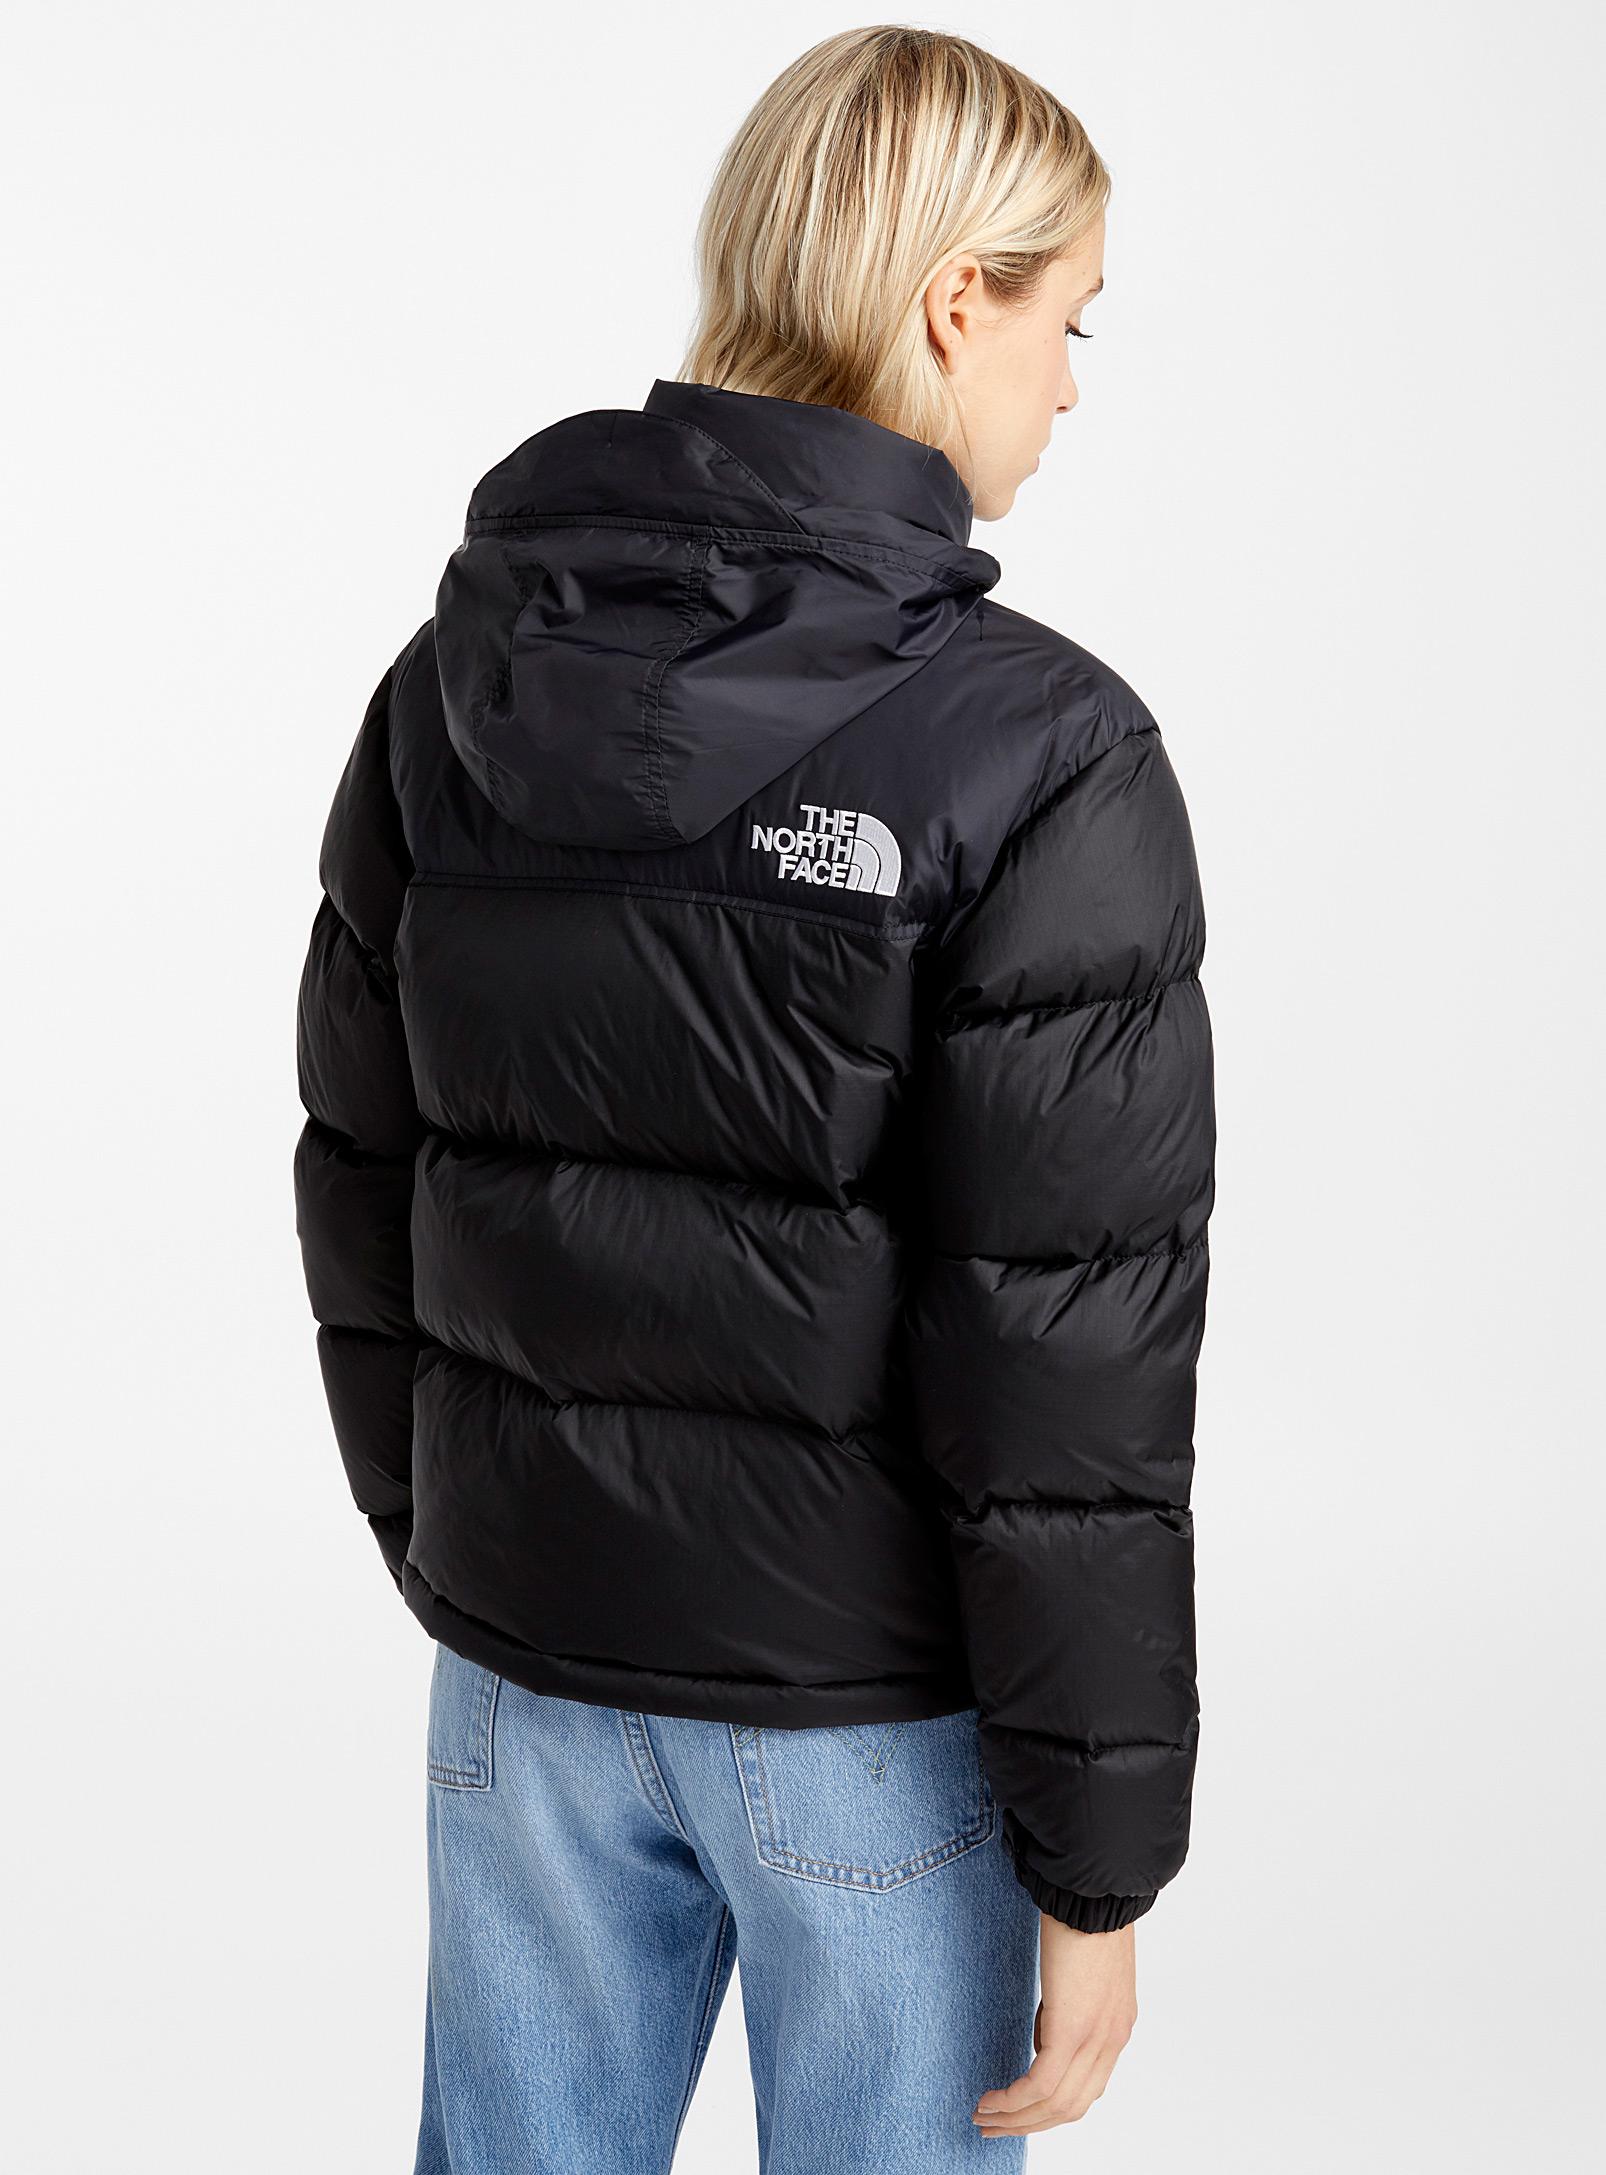 The North Face Nuptse Down Puffer Jacket in Black - Lyst